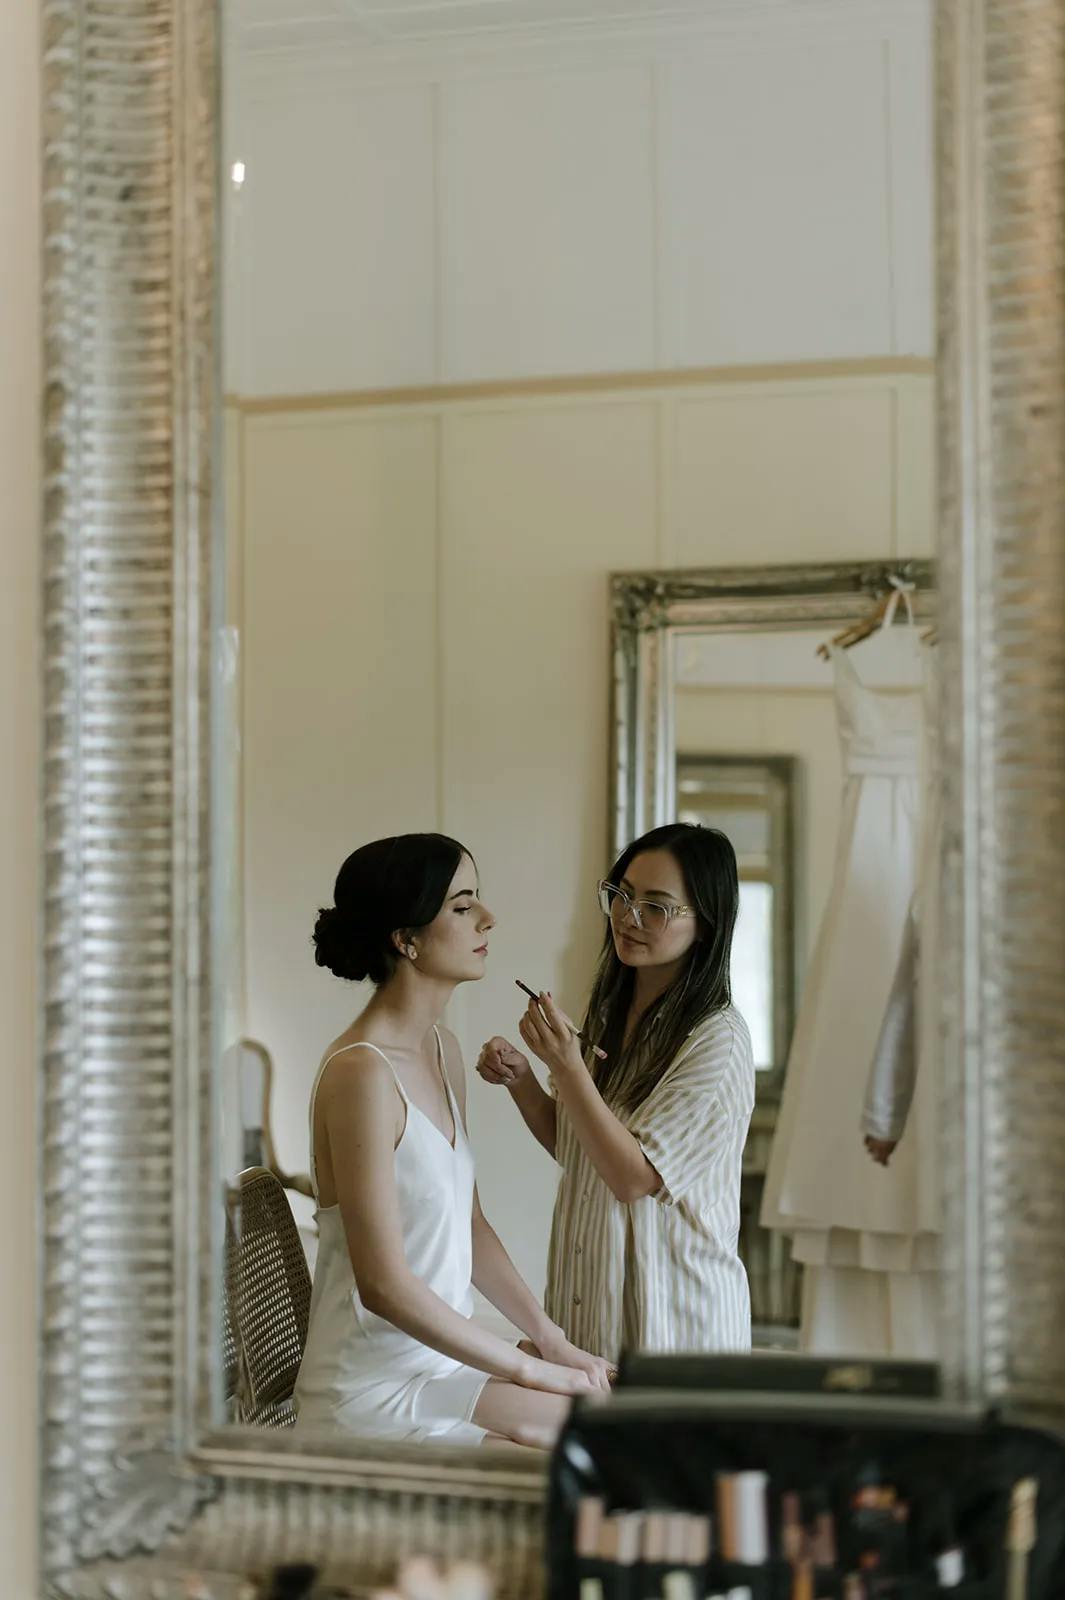 A woman wearing a white dress sits on a chair in front of a large mirror, while another woman, standing, applies makeup to her face. A white wedding dress hangs on the wall in the background. Various makeup tools are seen in the foreground.